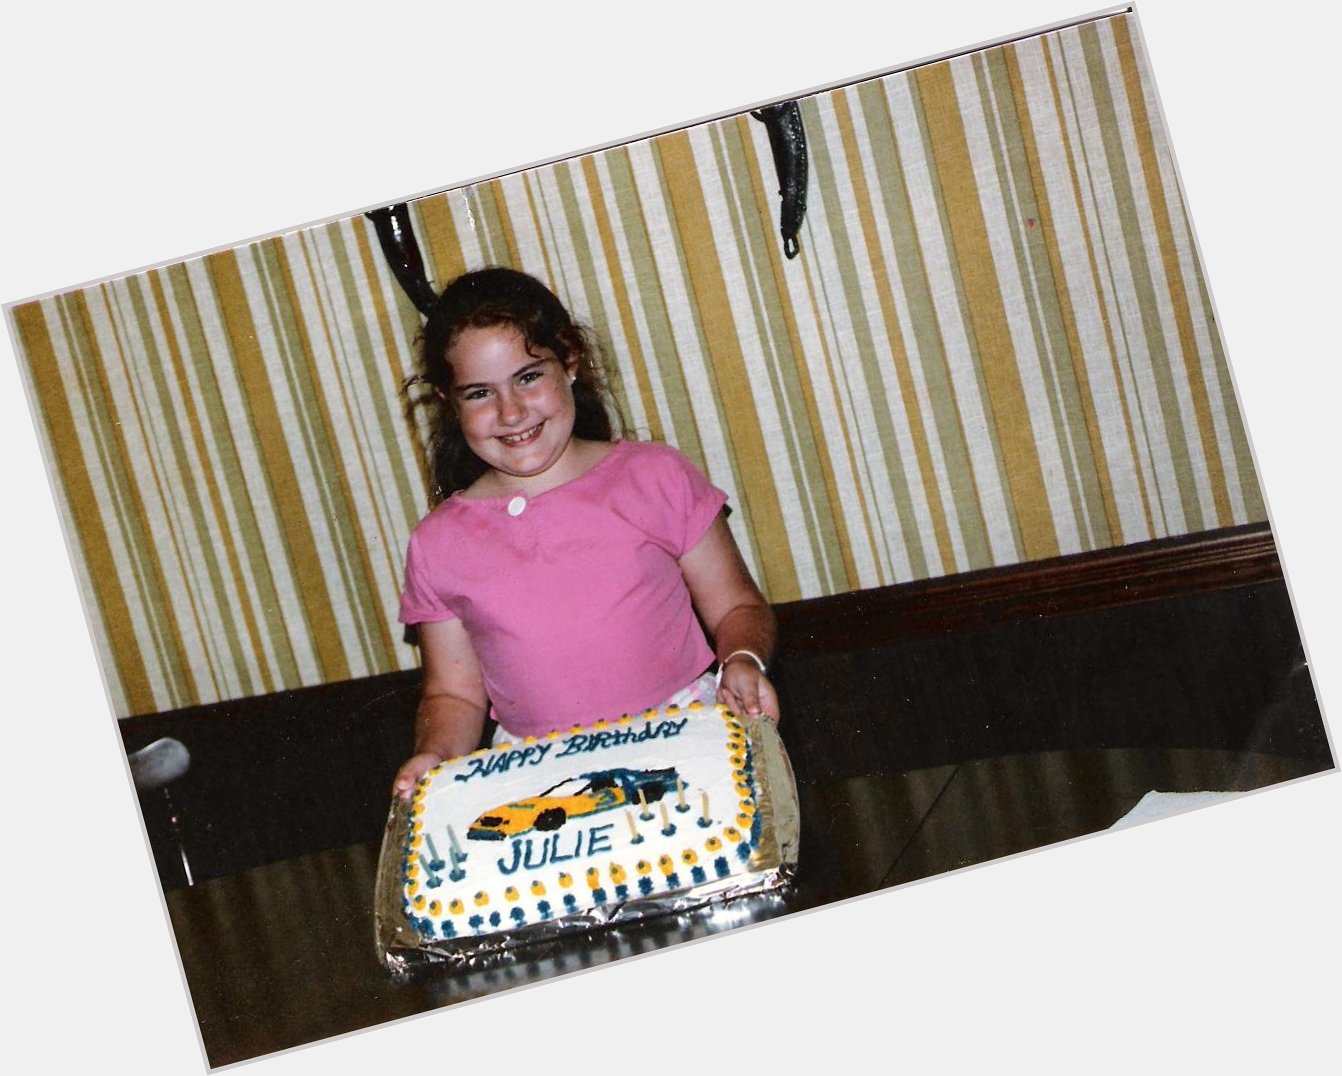 Happy Birthday to my sister Julie! Pic from 1985 with Dale Earnhardt cake 